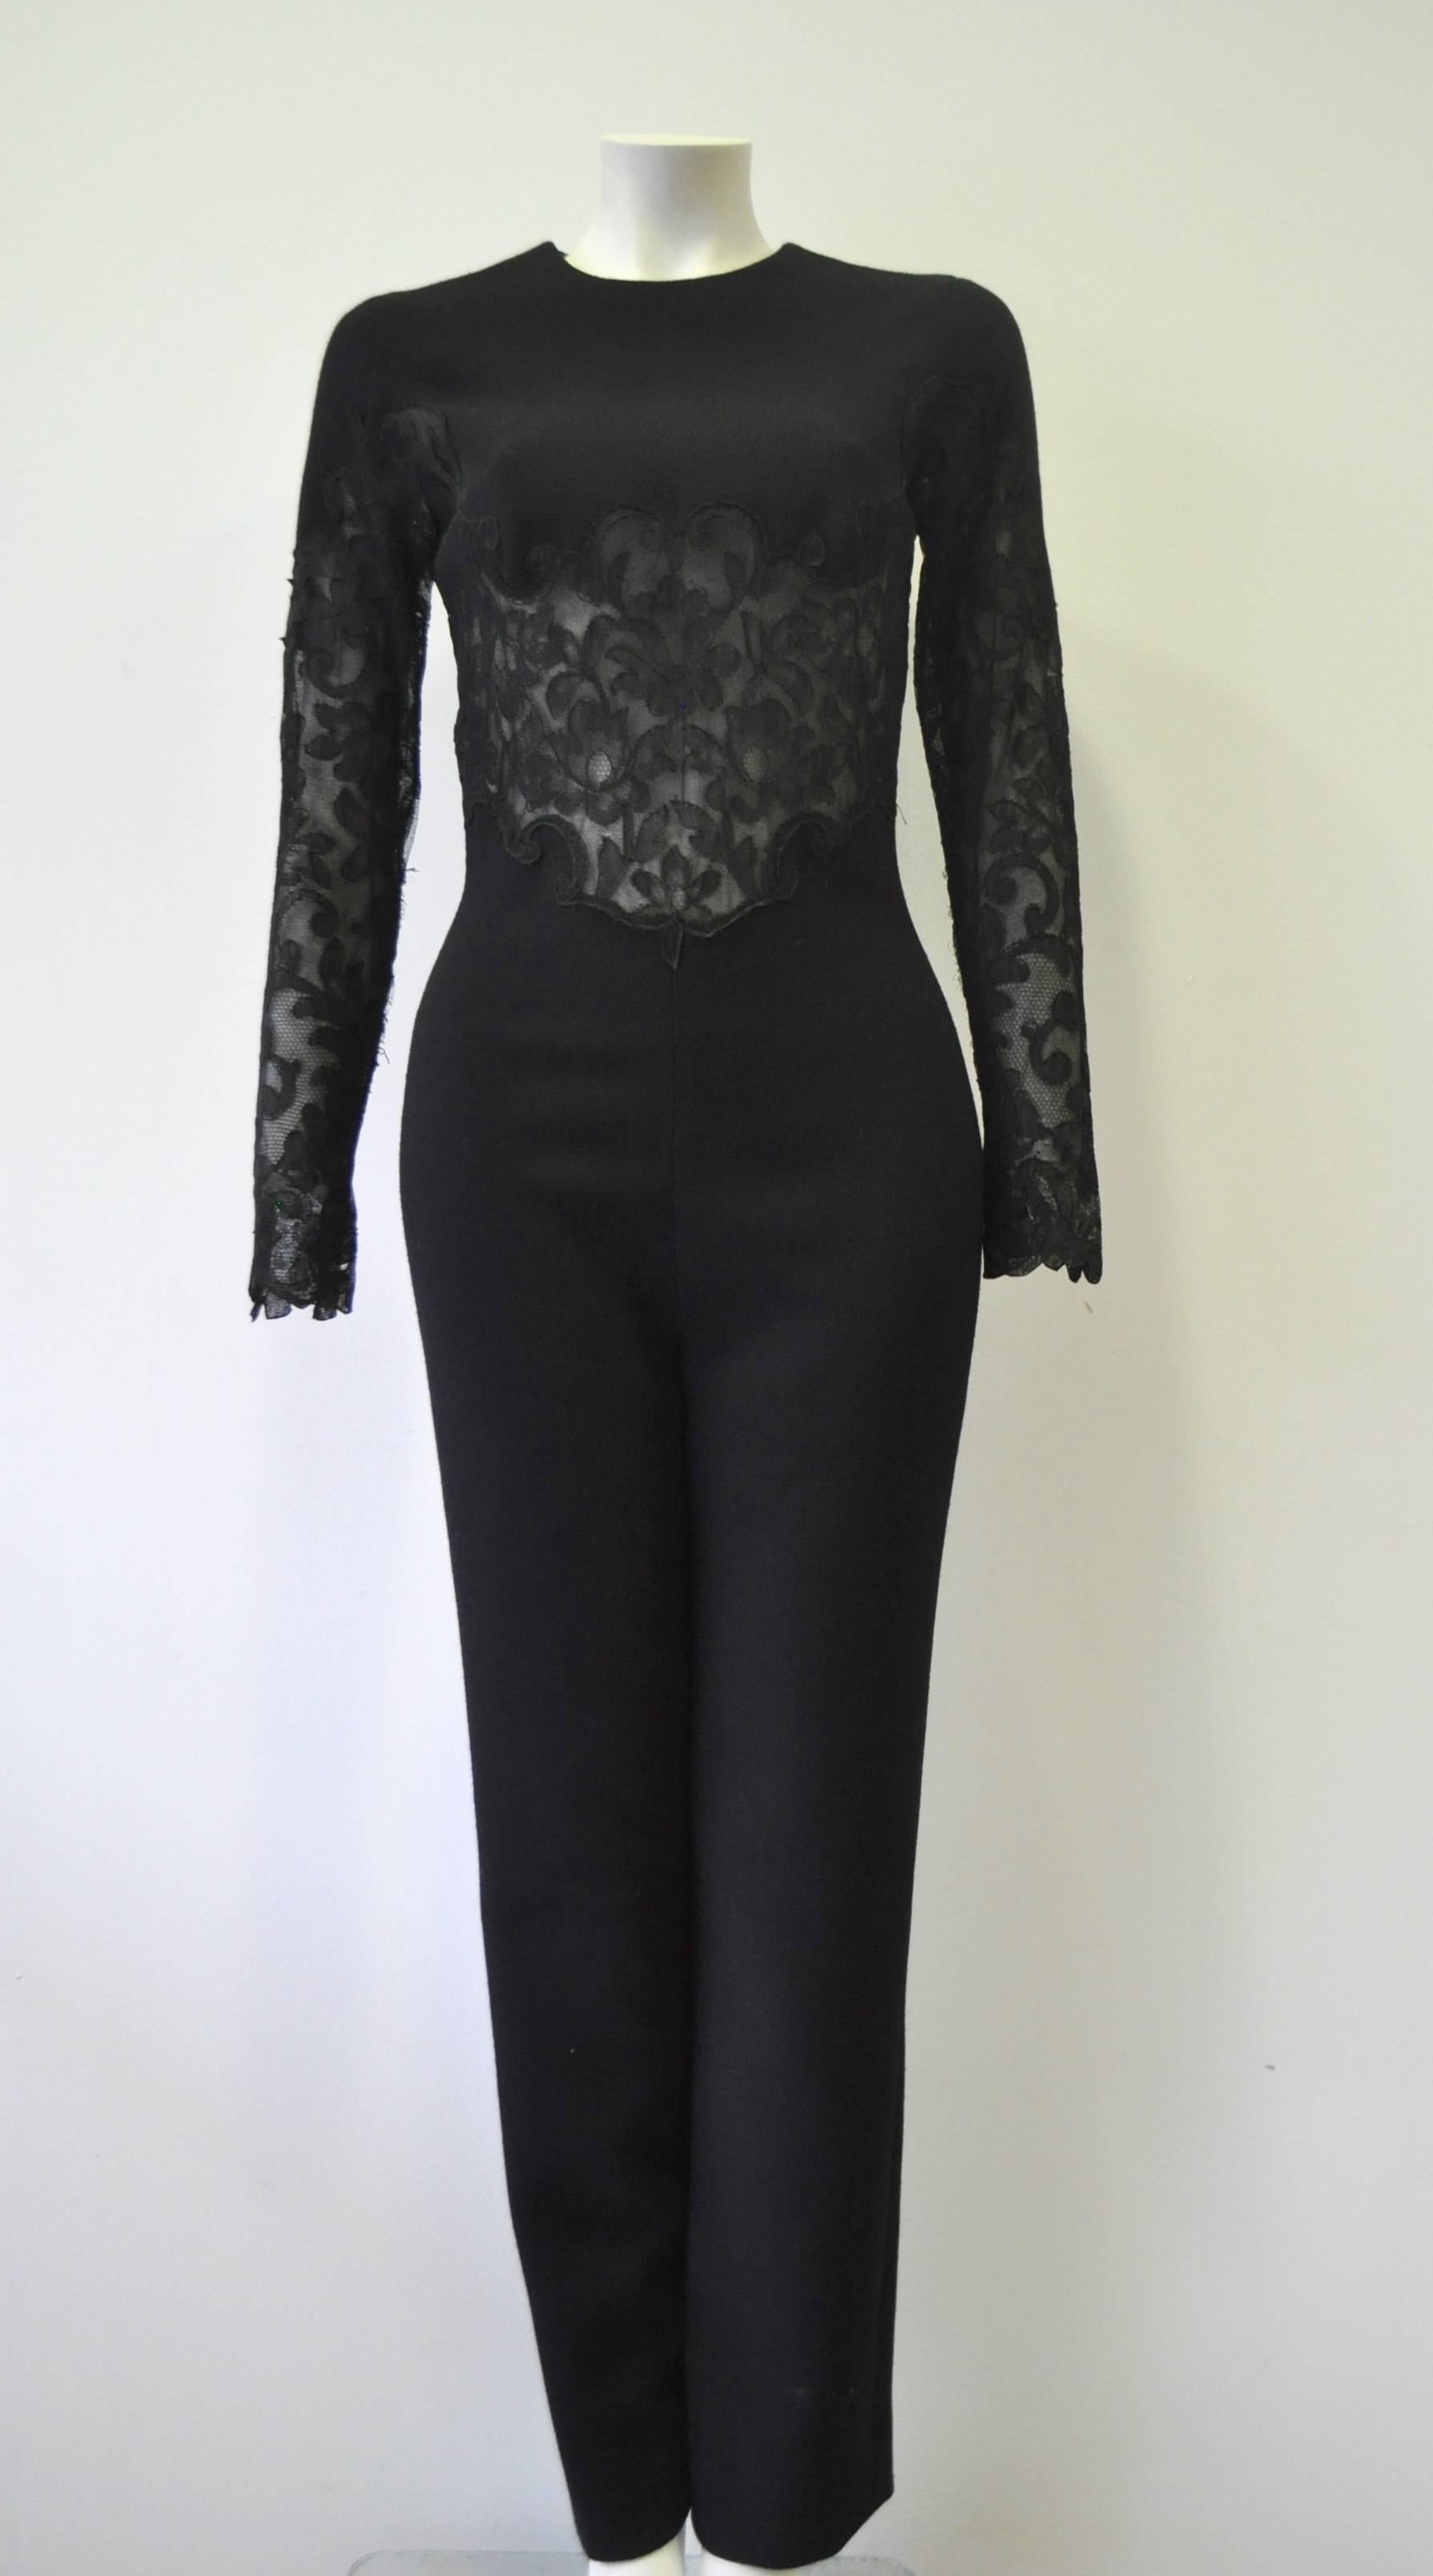 Very Original Gianni Versace Couture Knock-Out Evening 100% Wool Jumpsuit with Sheer Lace Midriff Panel, Fall 1991